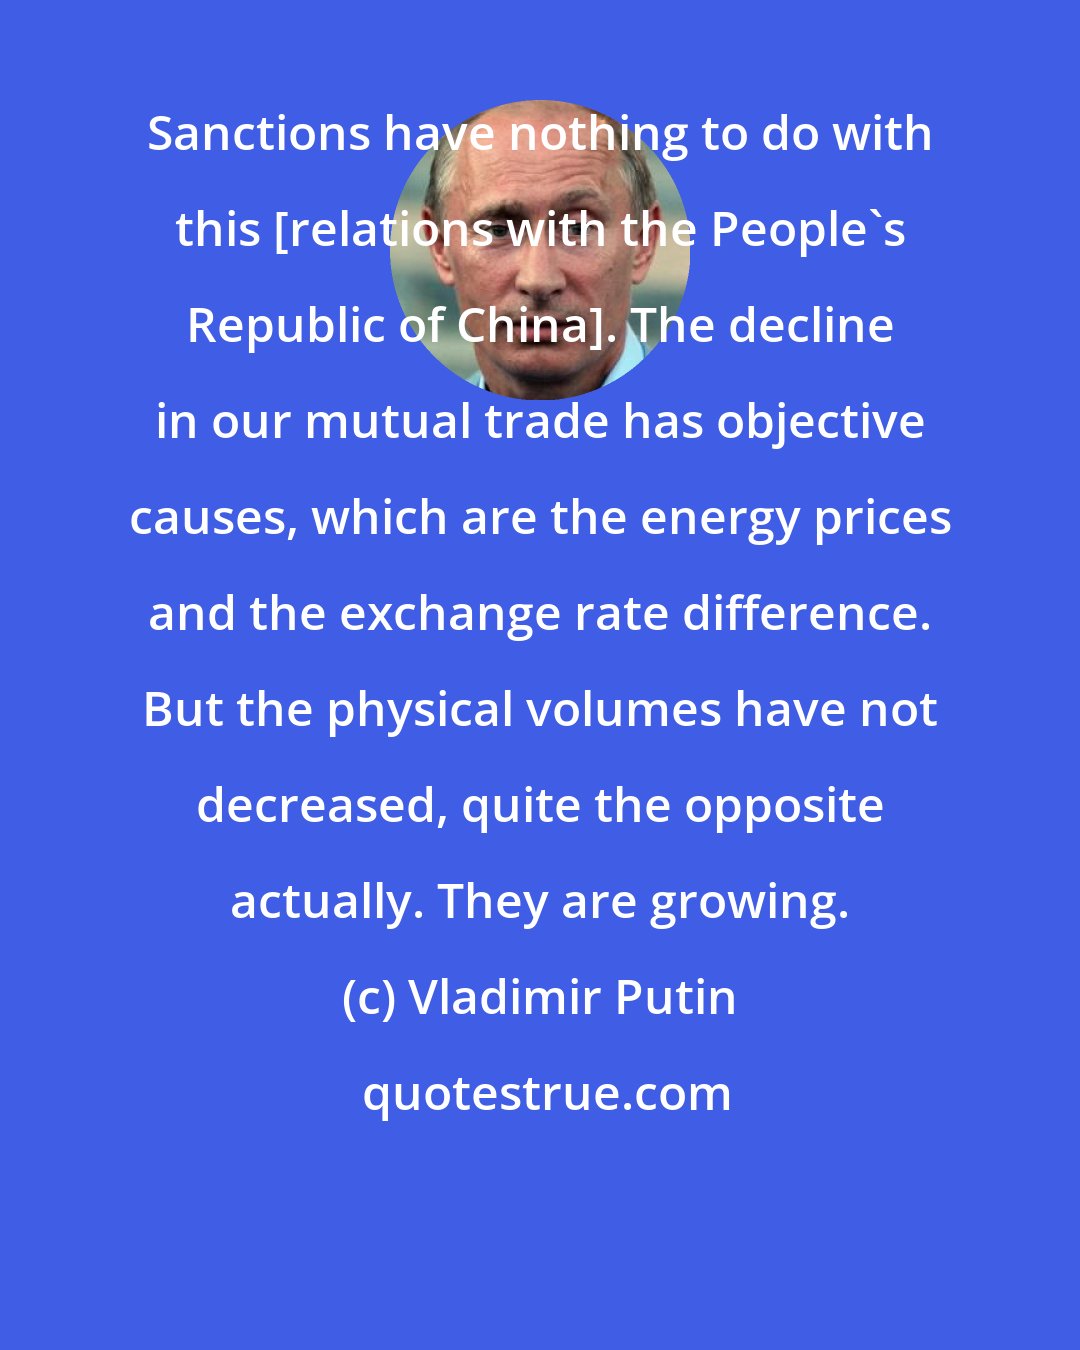 Vladimir Putin: Sanctions have nothing to do with this [relations with the People's Republic of China]. The decline in our mutual trade has objective causes, which are the energy prices and the exchange rate difference. But the physical volumes have not decreased, quite the opposite actually. They are growing.